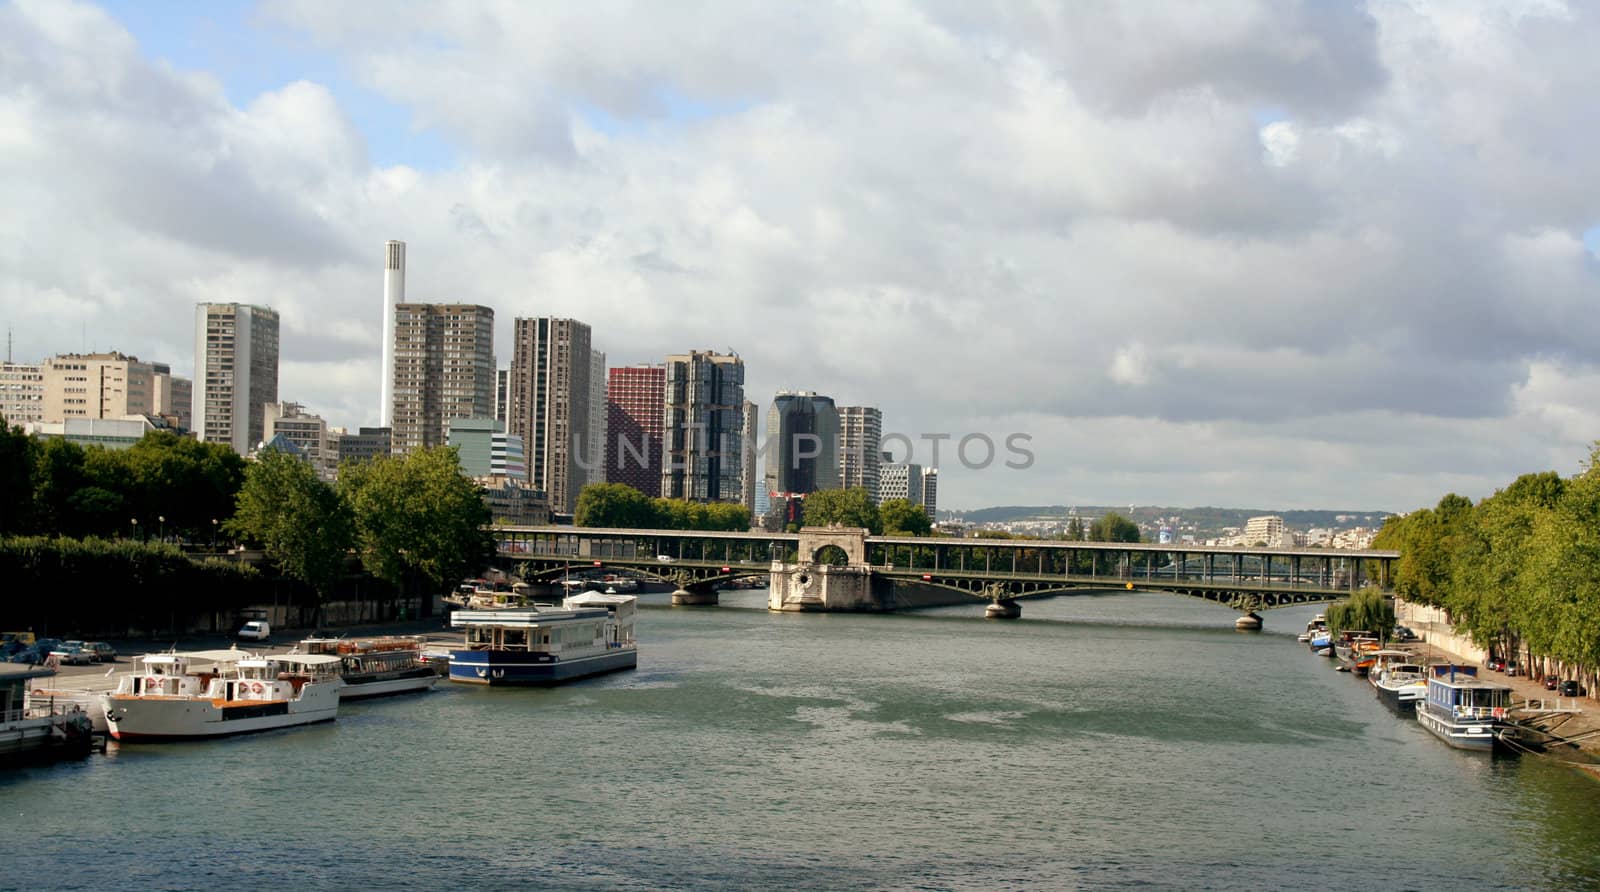 Houses on the streets of the capital of France - Paris. River Seine